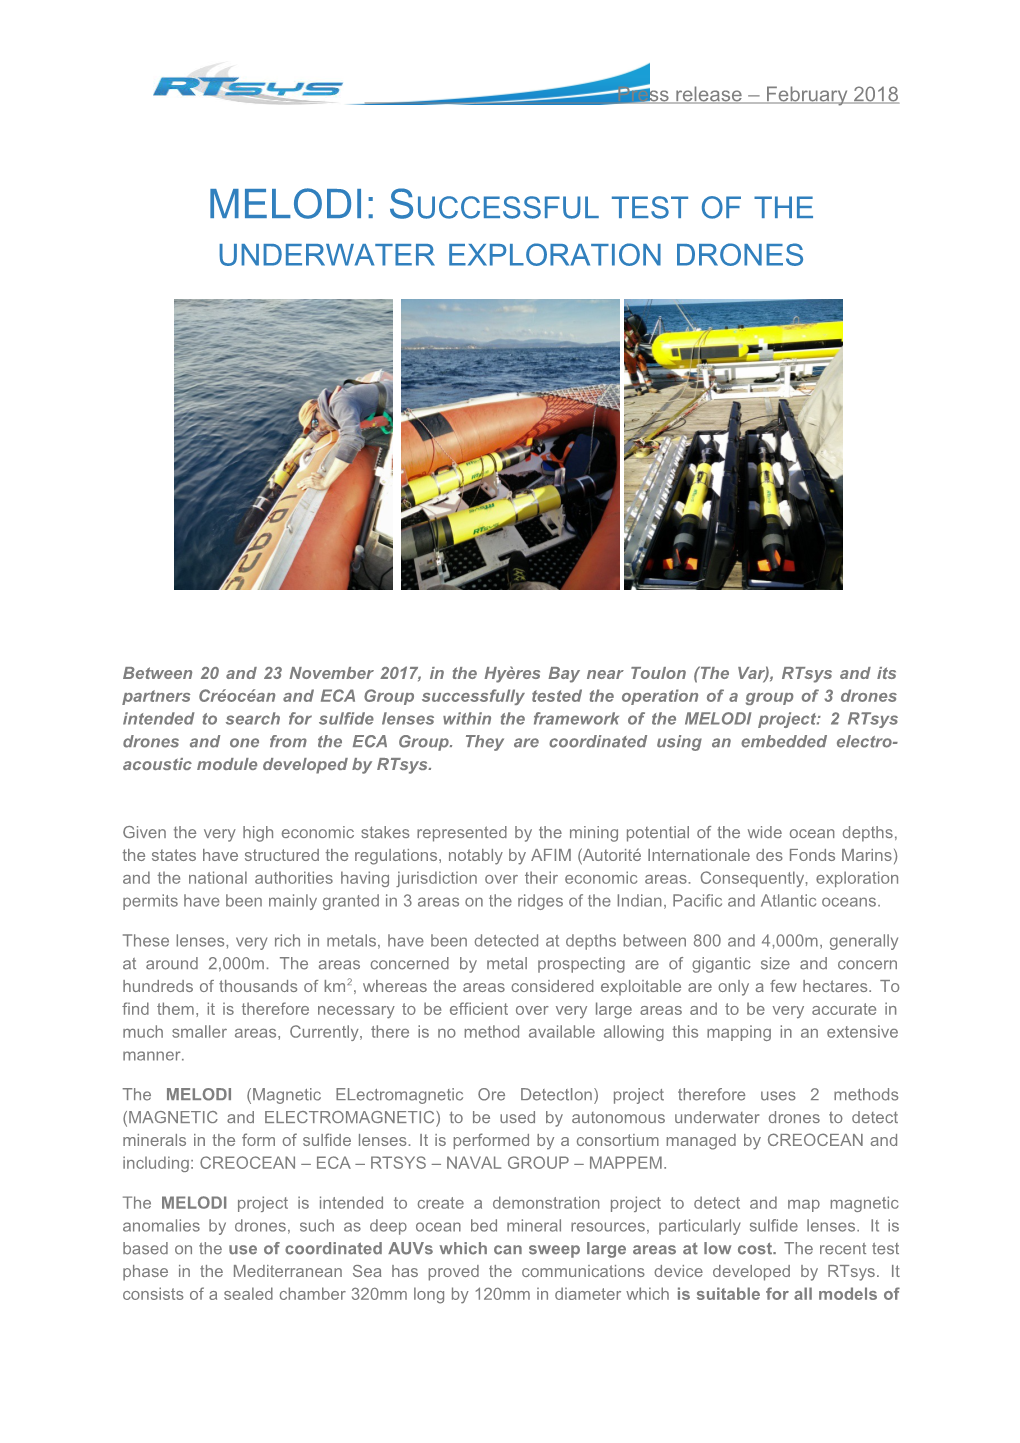 MELODI:Successful Test of the Underwater Exploration Drones